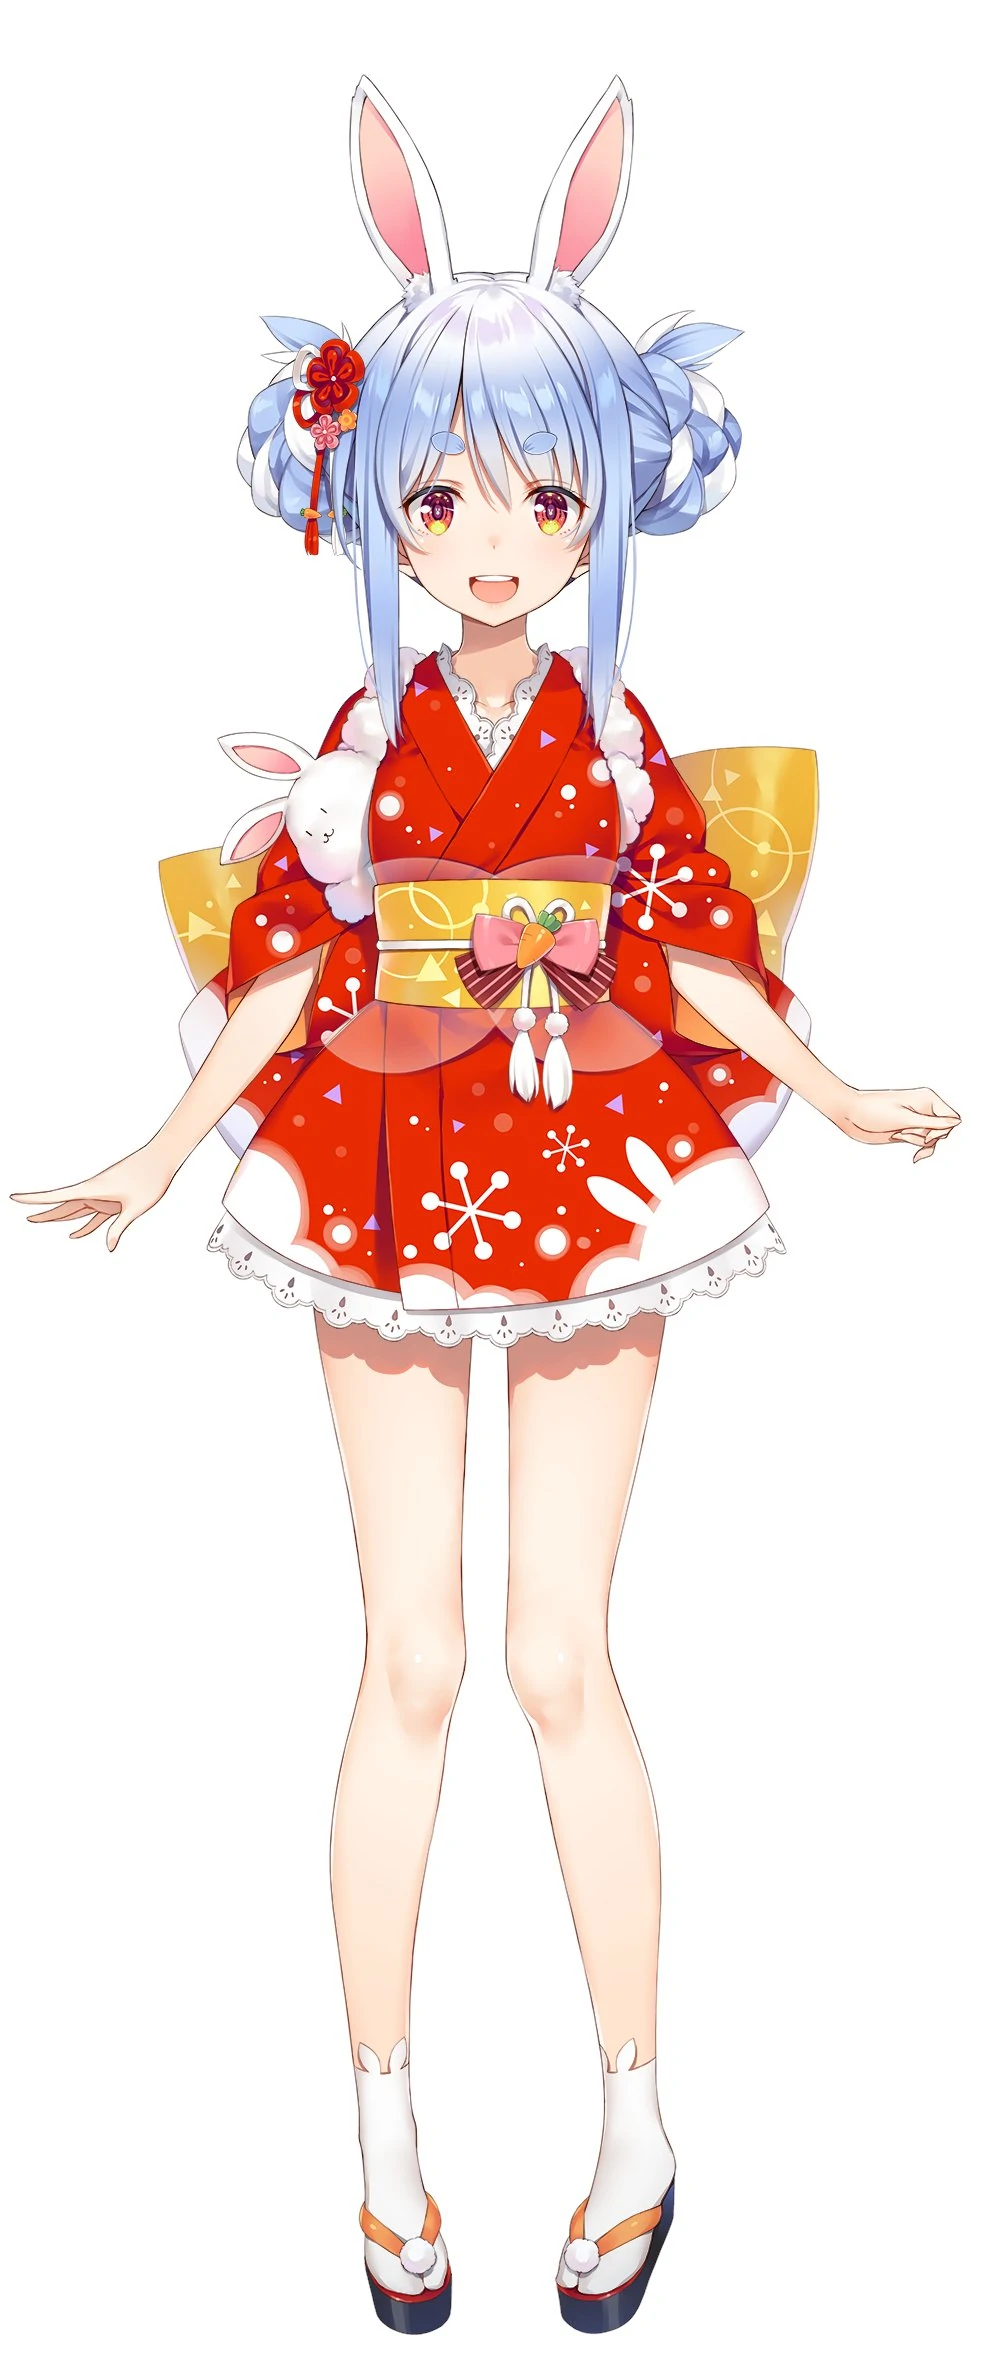 Pekora's New Year's Outfit